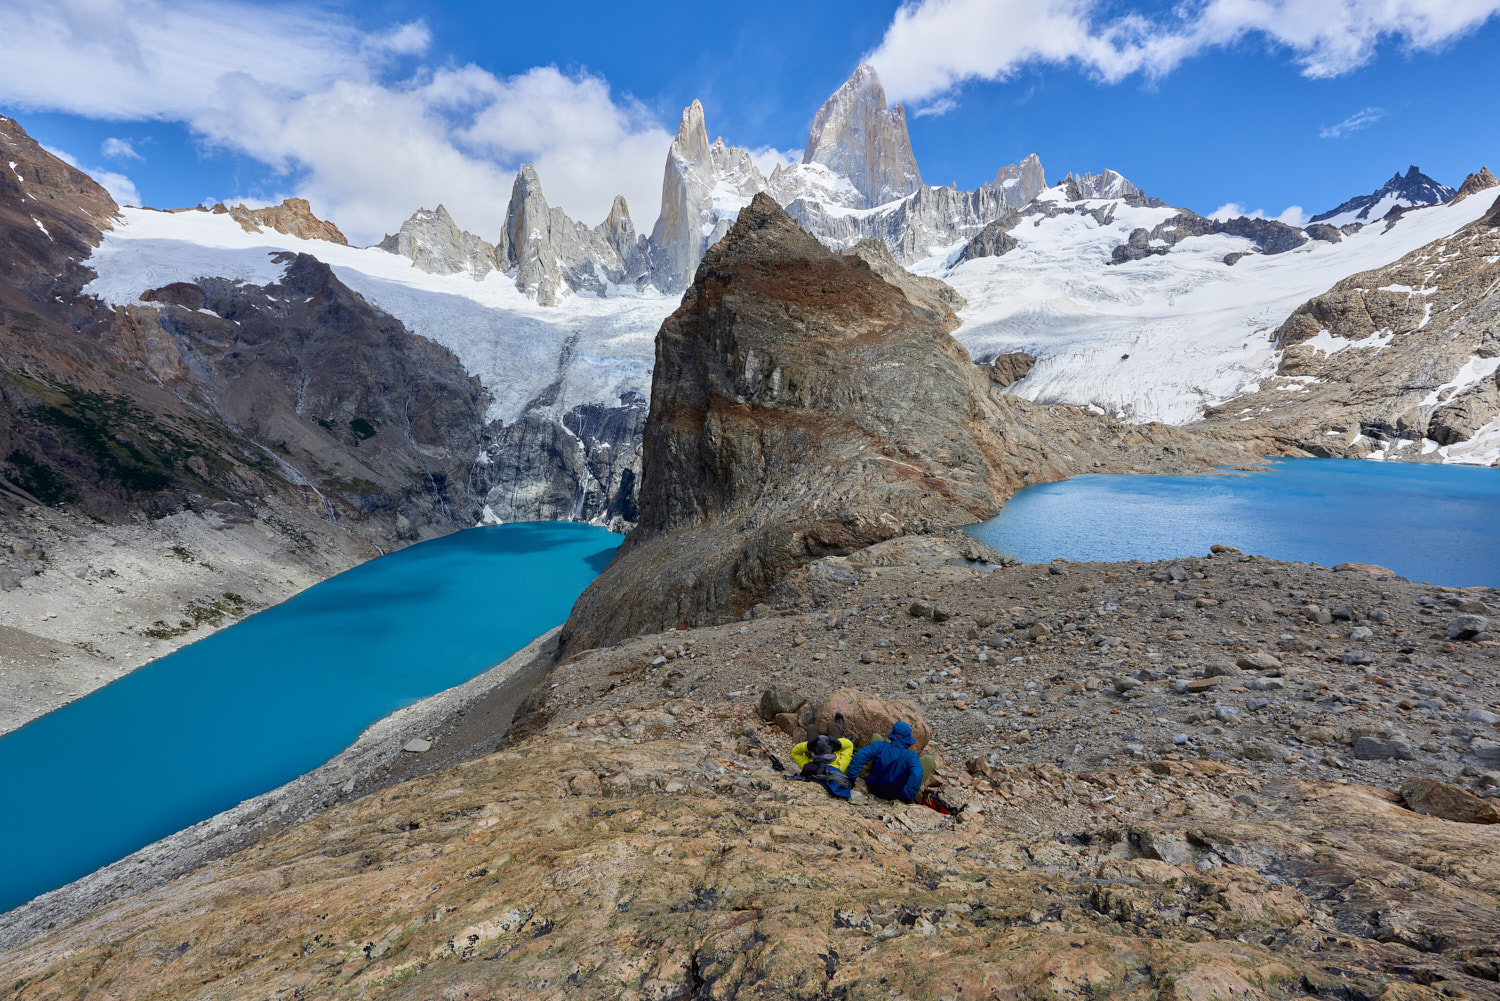 Patagonia, Argentina: A couple in mountain gear rests on rocks with view to Lago de los Tres and Mount Fitz Roy.